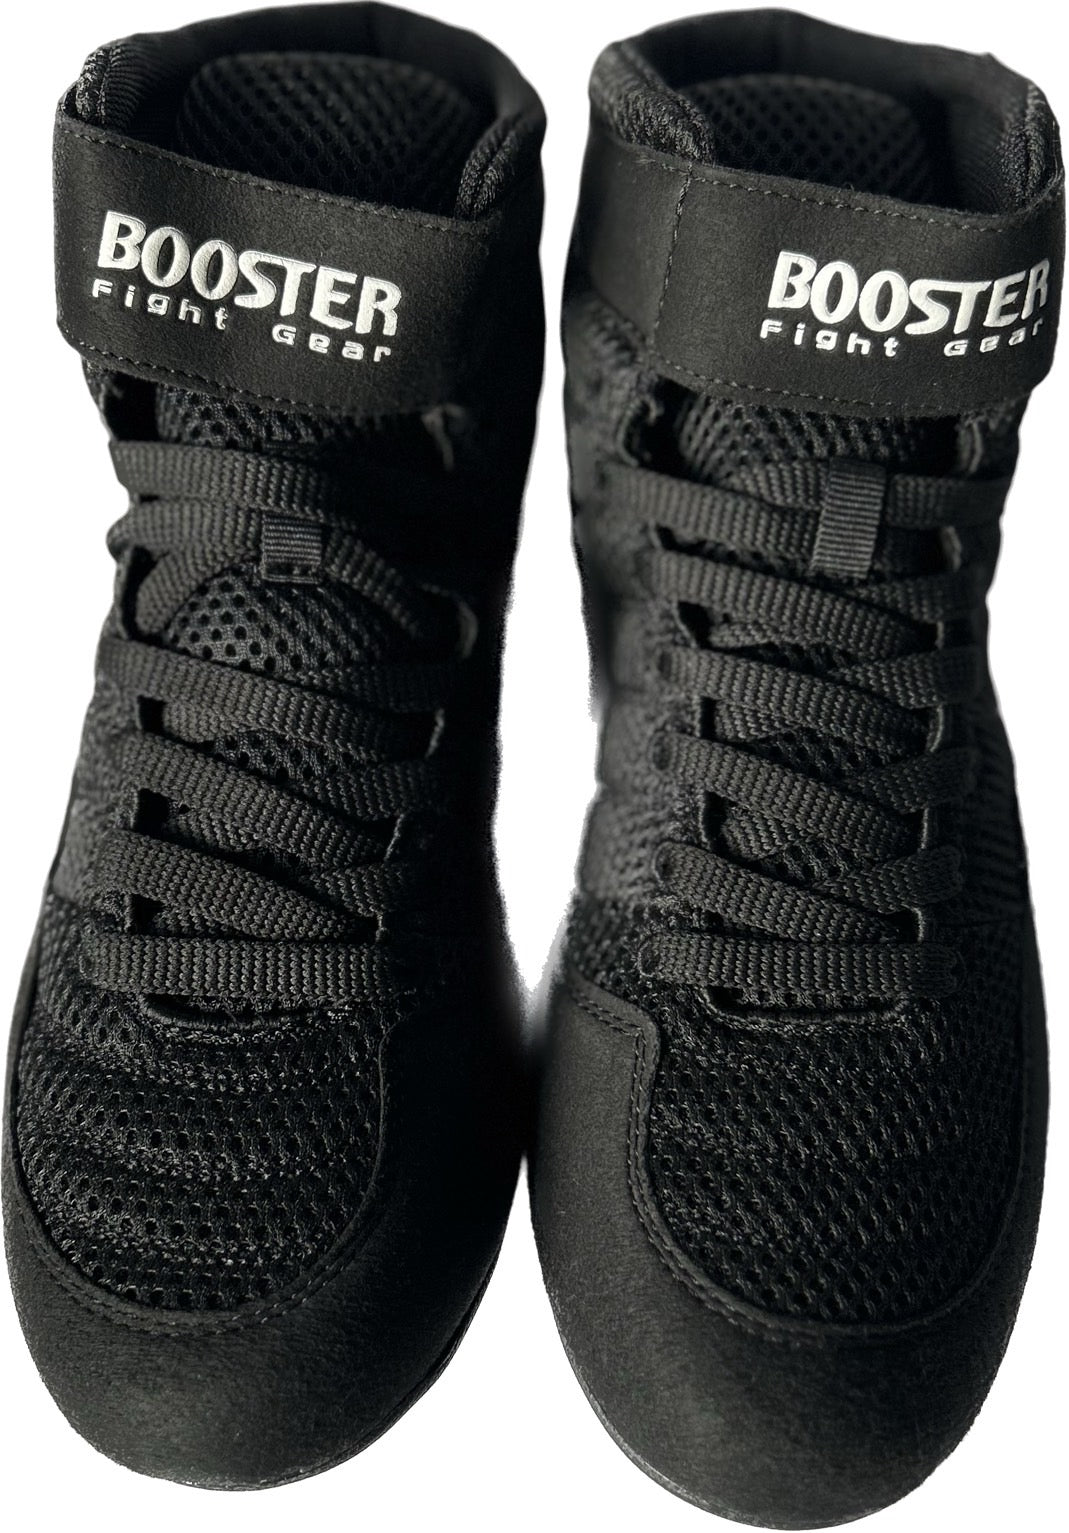 Booster Boxing Shoes Black